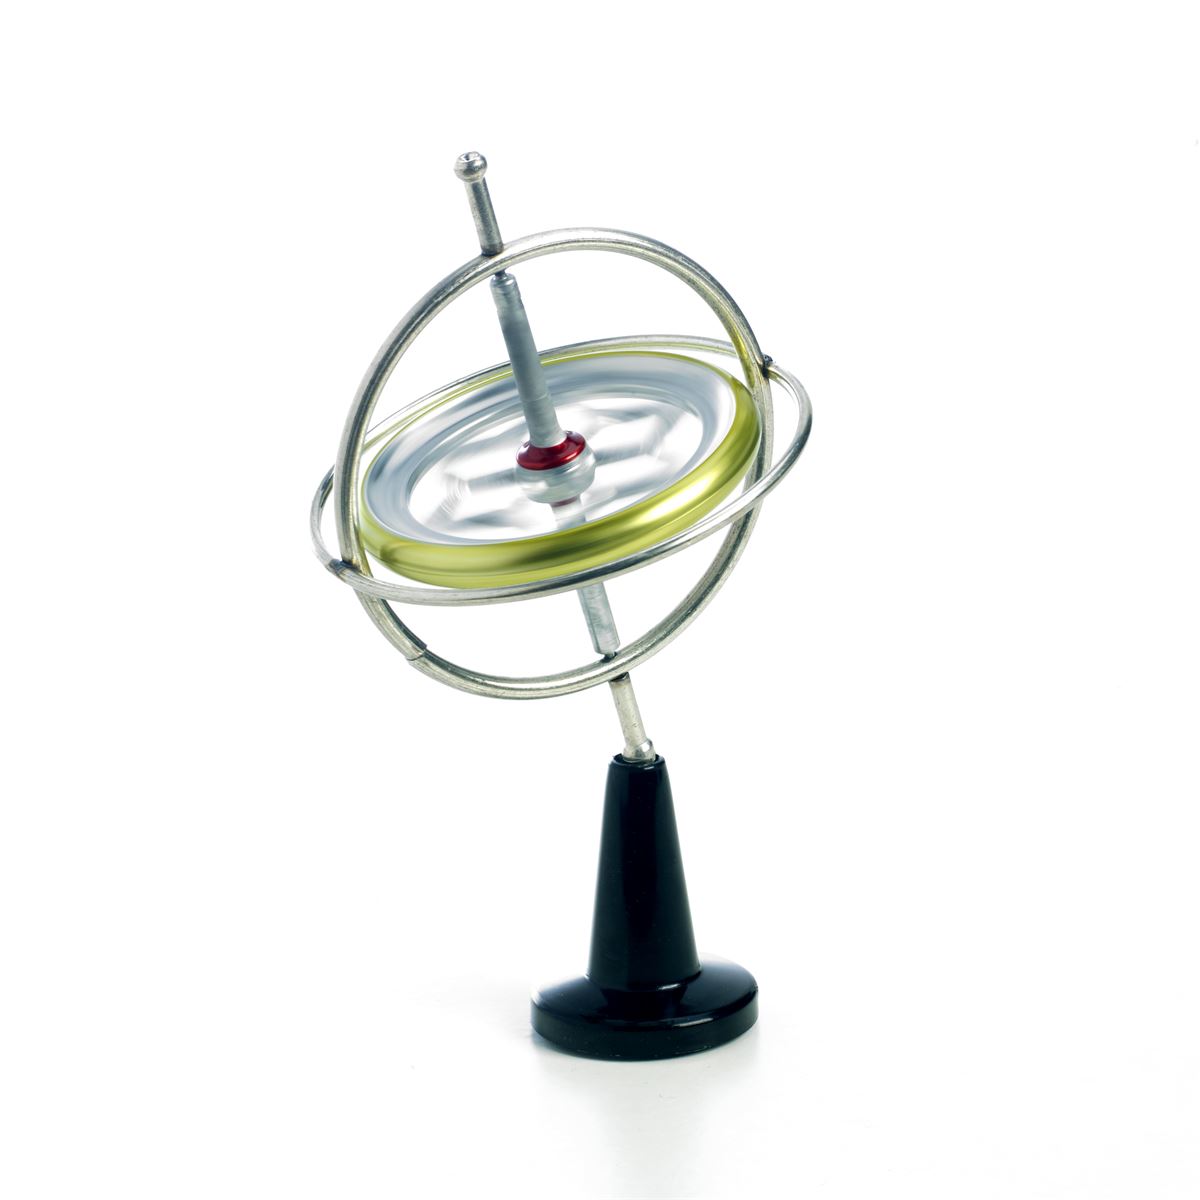 GYROSCOPE #00100 TEDCO TOYS' Original Gyroscope Continues to fascinate & teach!! 